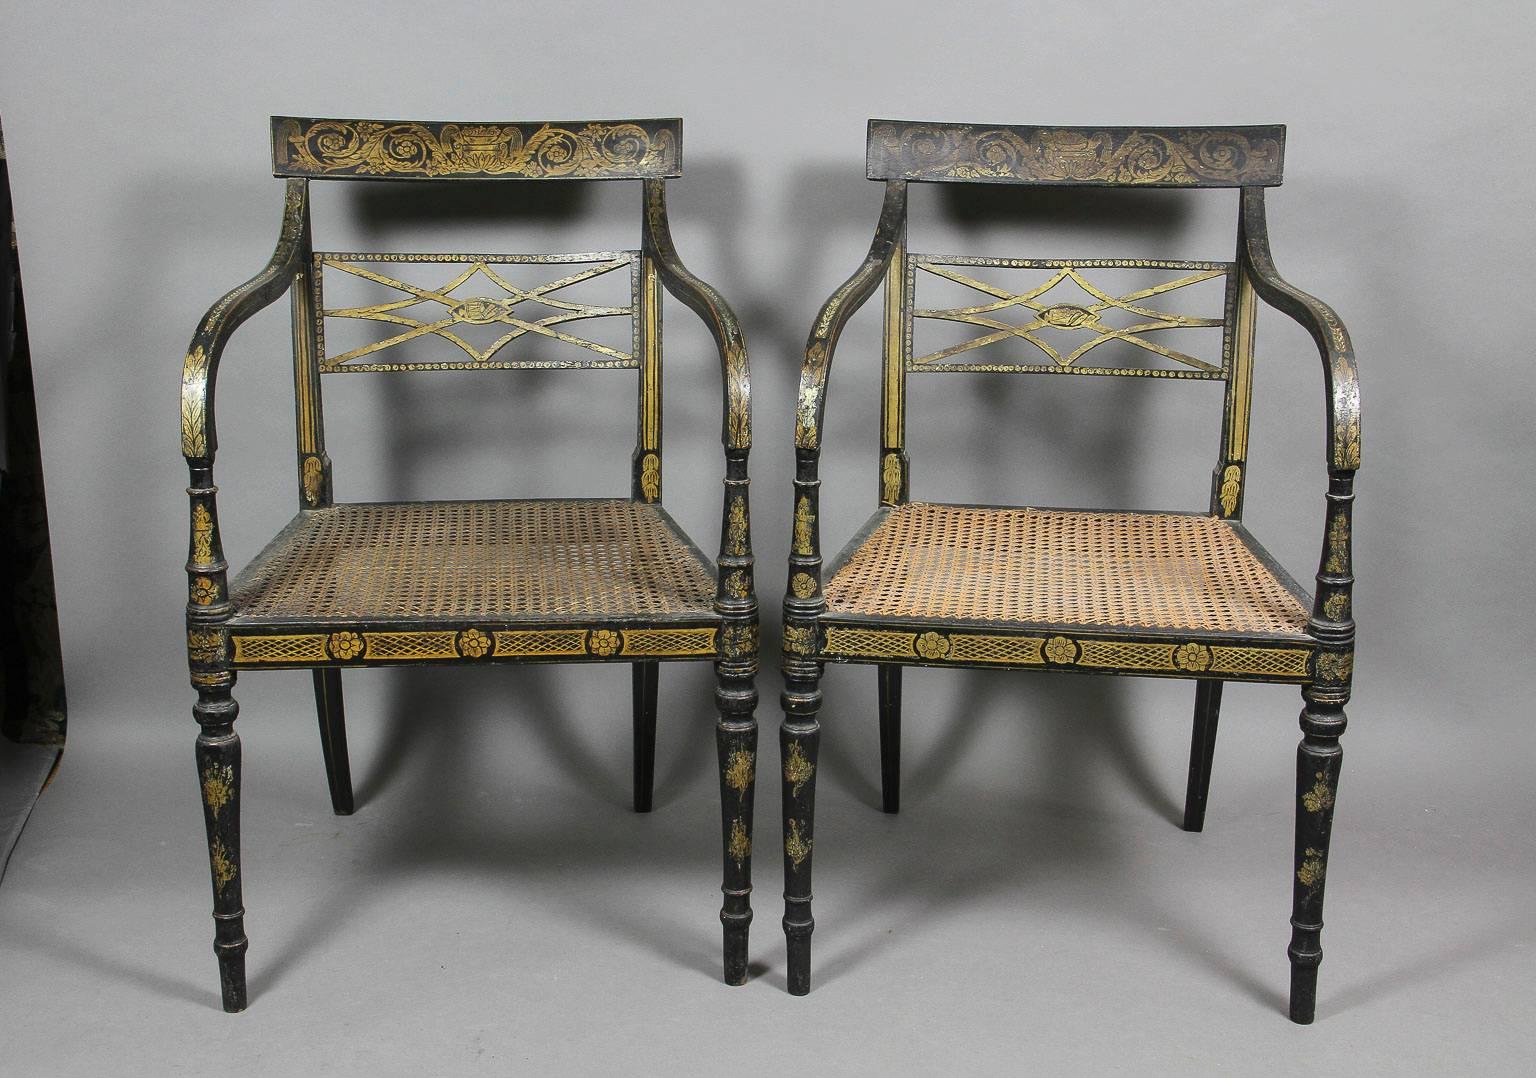 Each with a tablet crest decorated with scrolling arabesques over a pierced horizontal trellis splat, down swept arms joining a caned seat raised on circular tapered legs.